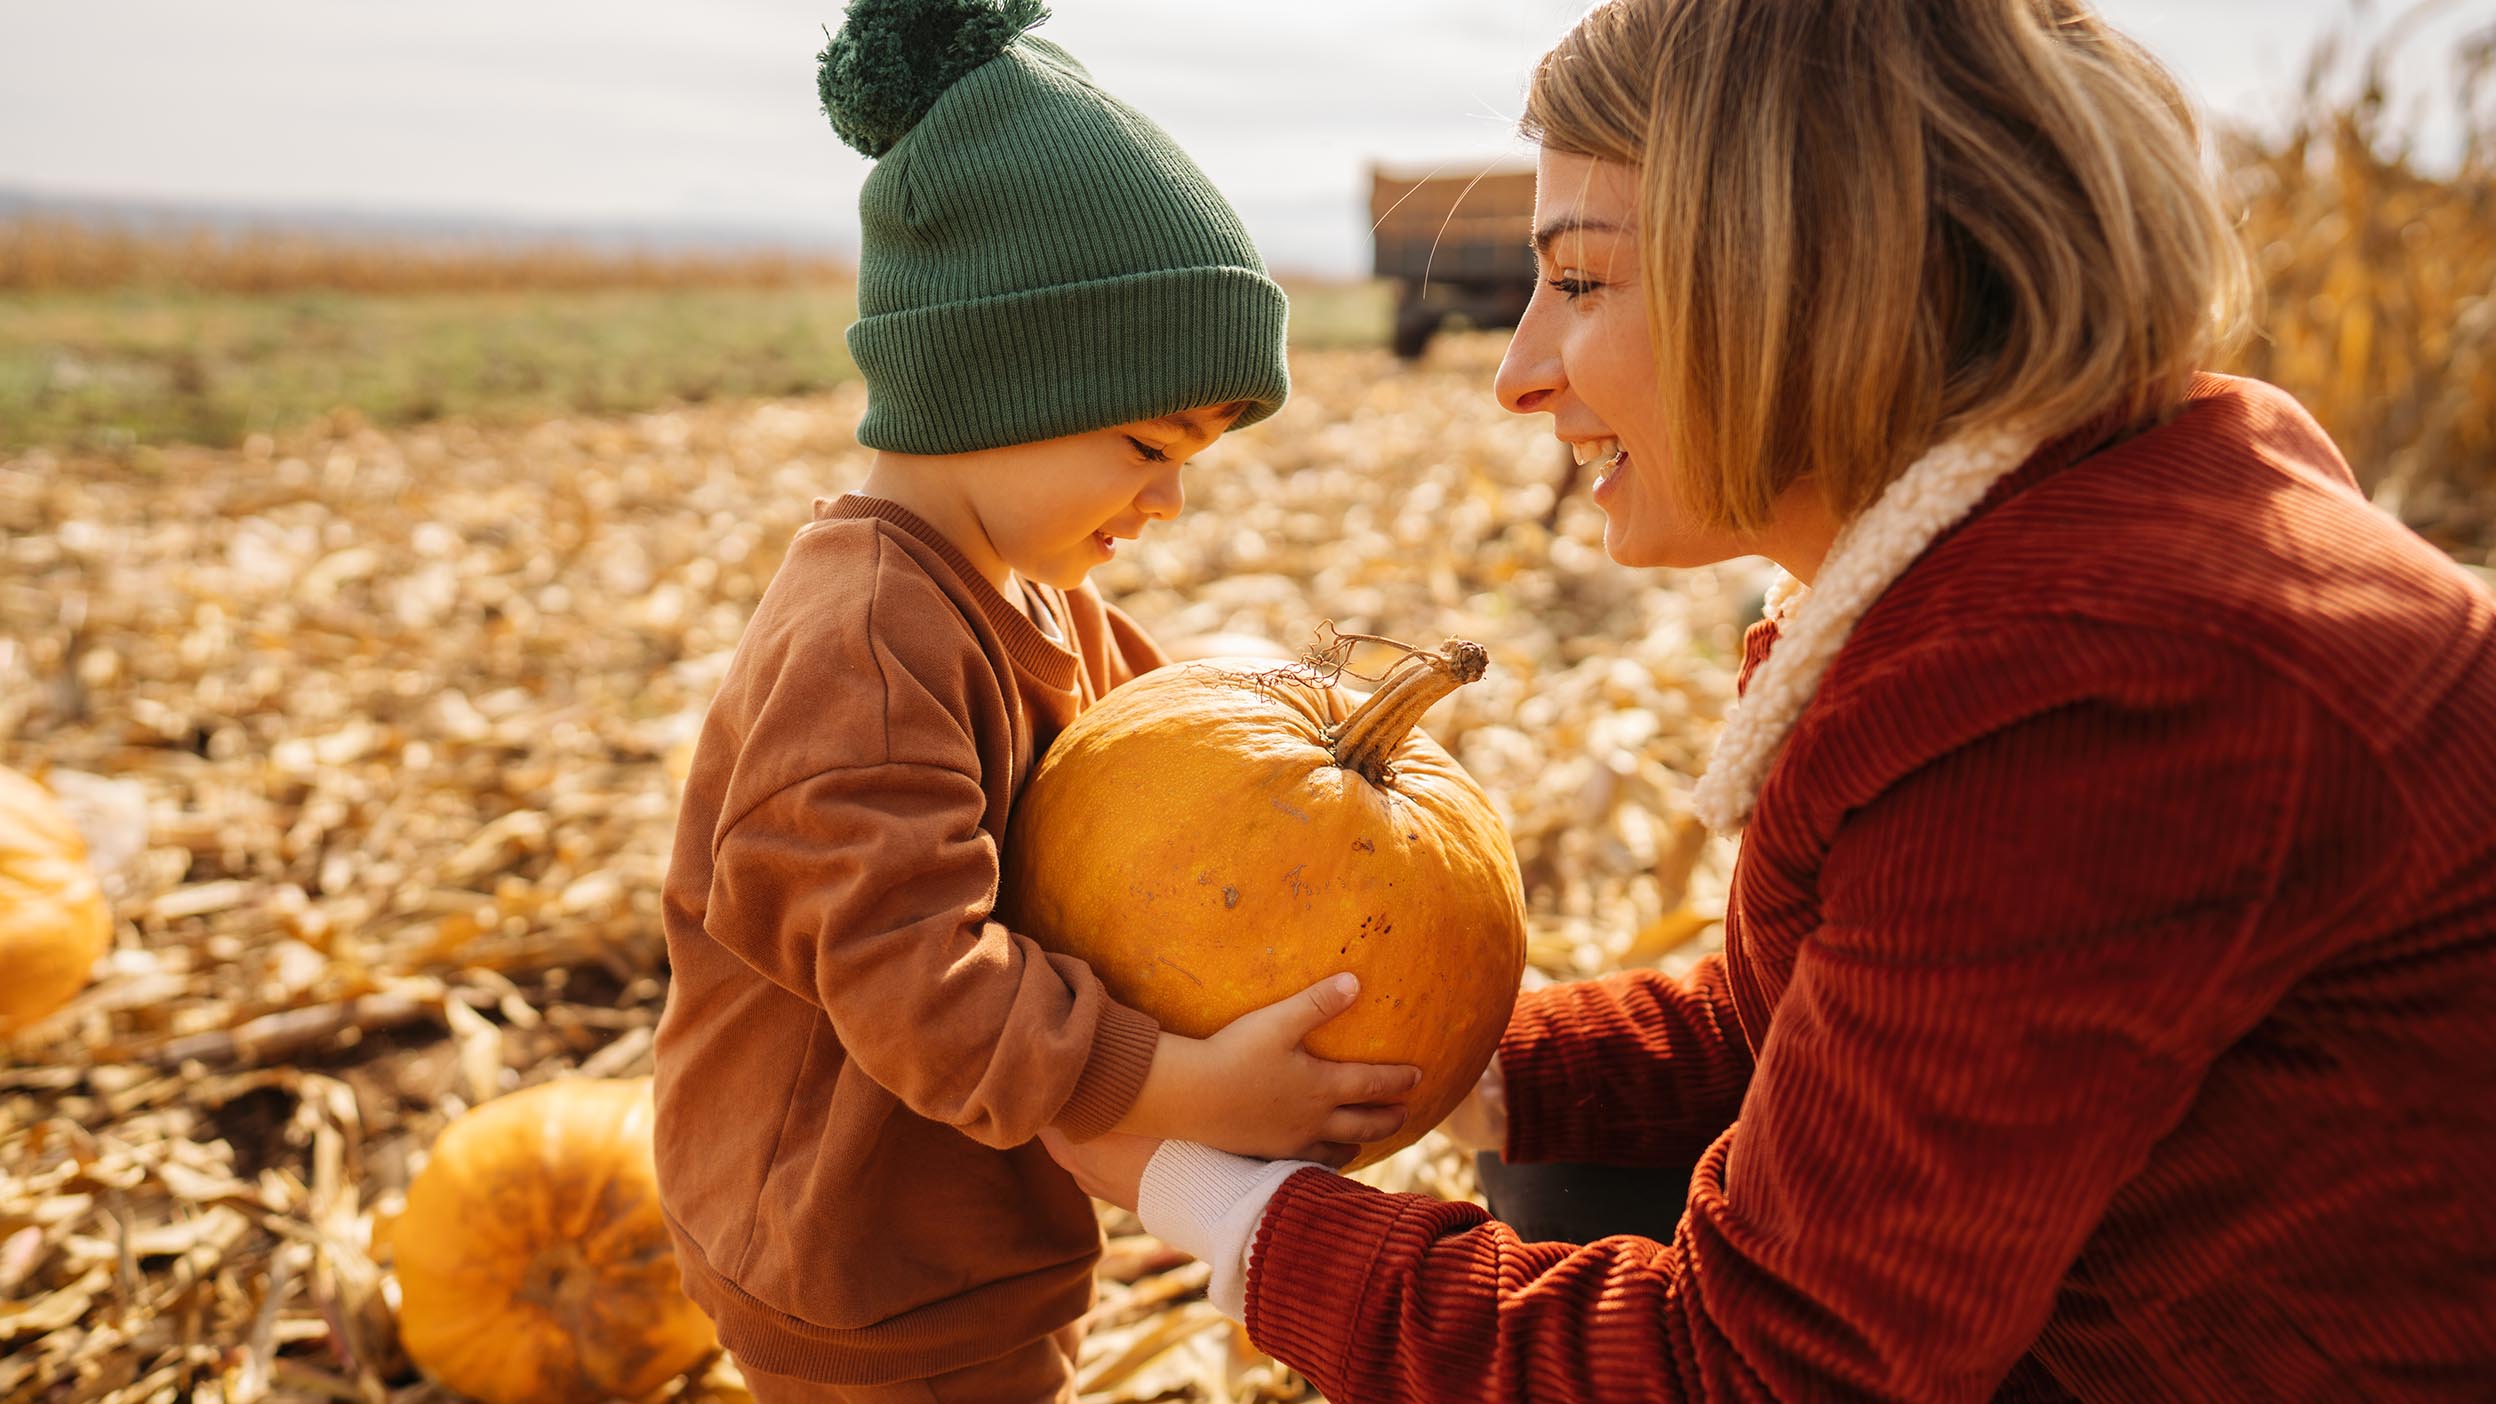 Photo of a woman and a child in a pumpkin patch.